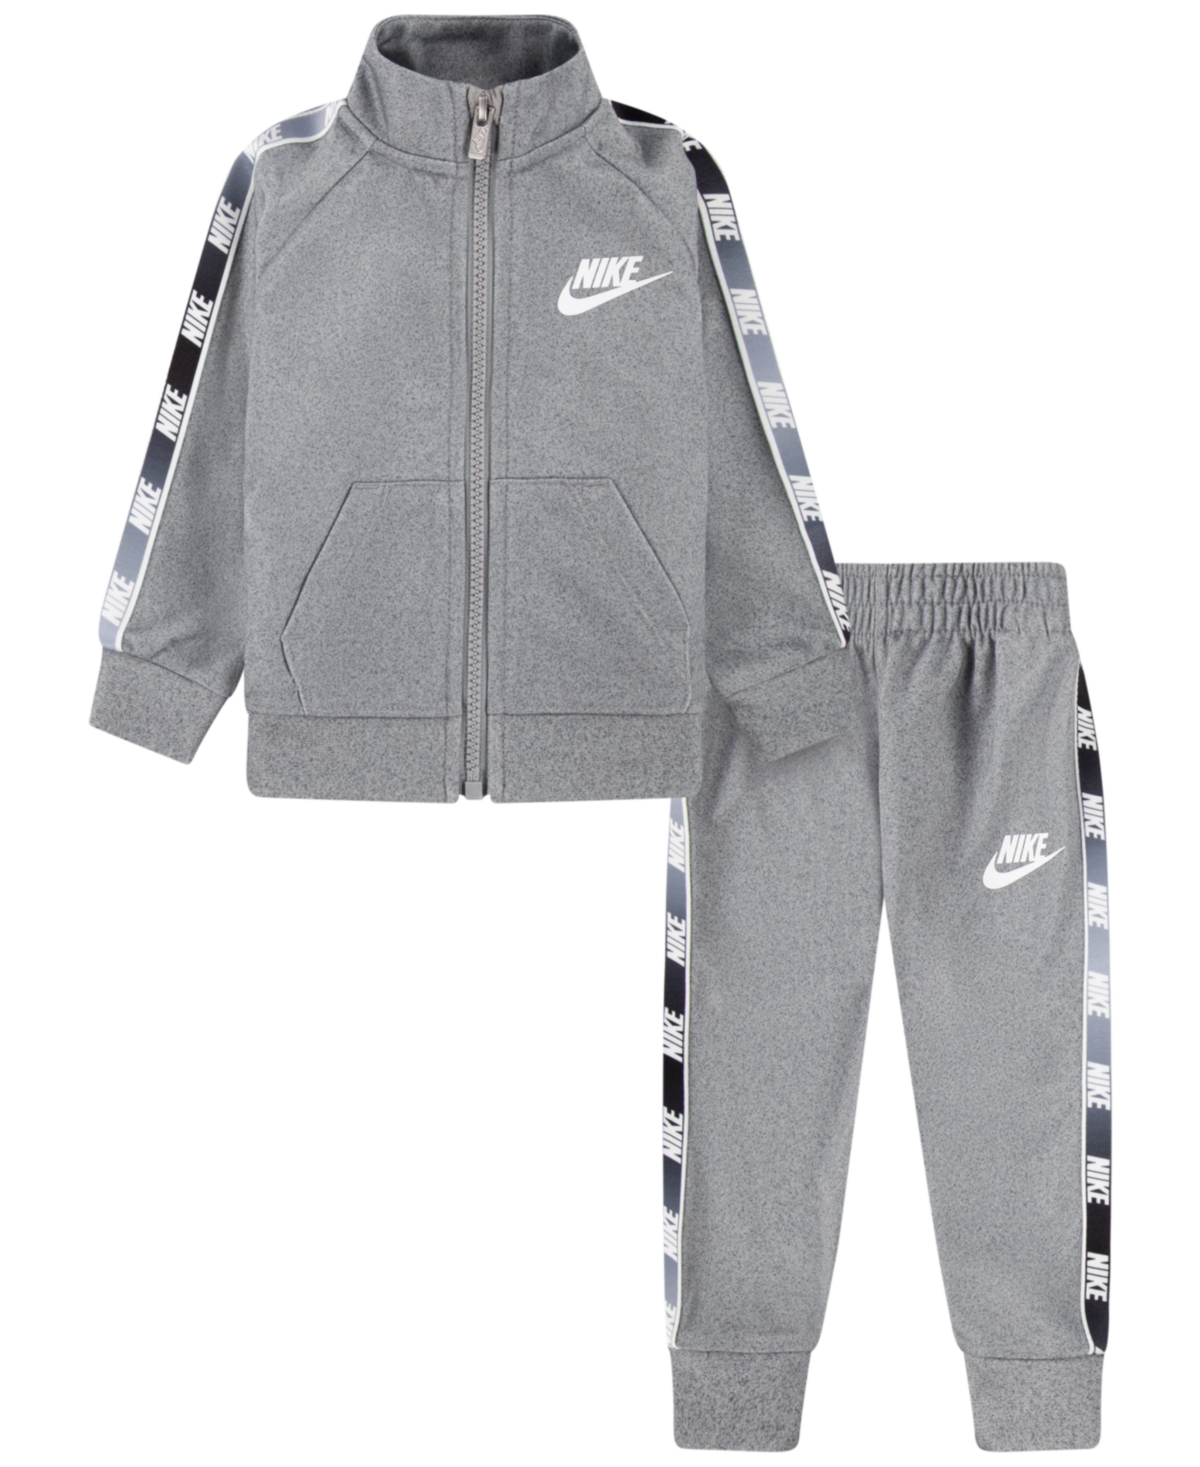 Nike Baby Boys Taping Tricot Full Zipped Jacket And Matching Pants, 2 Piece Set In Dark Gray Heather